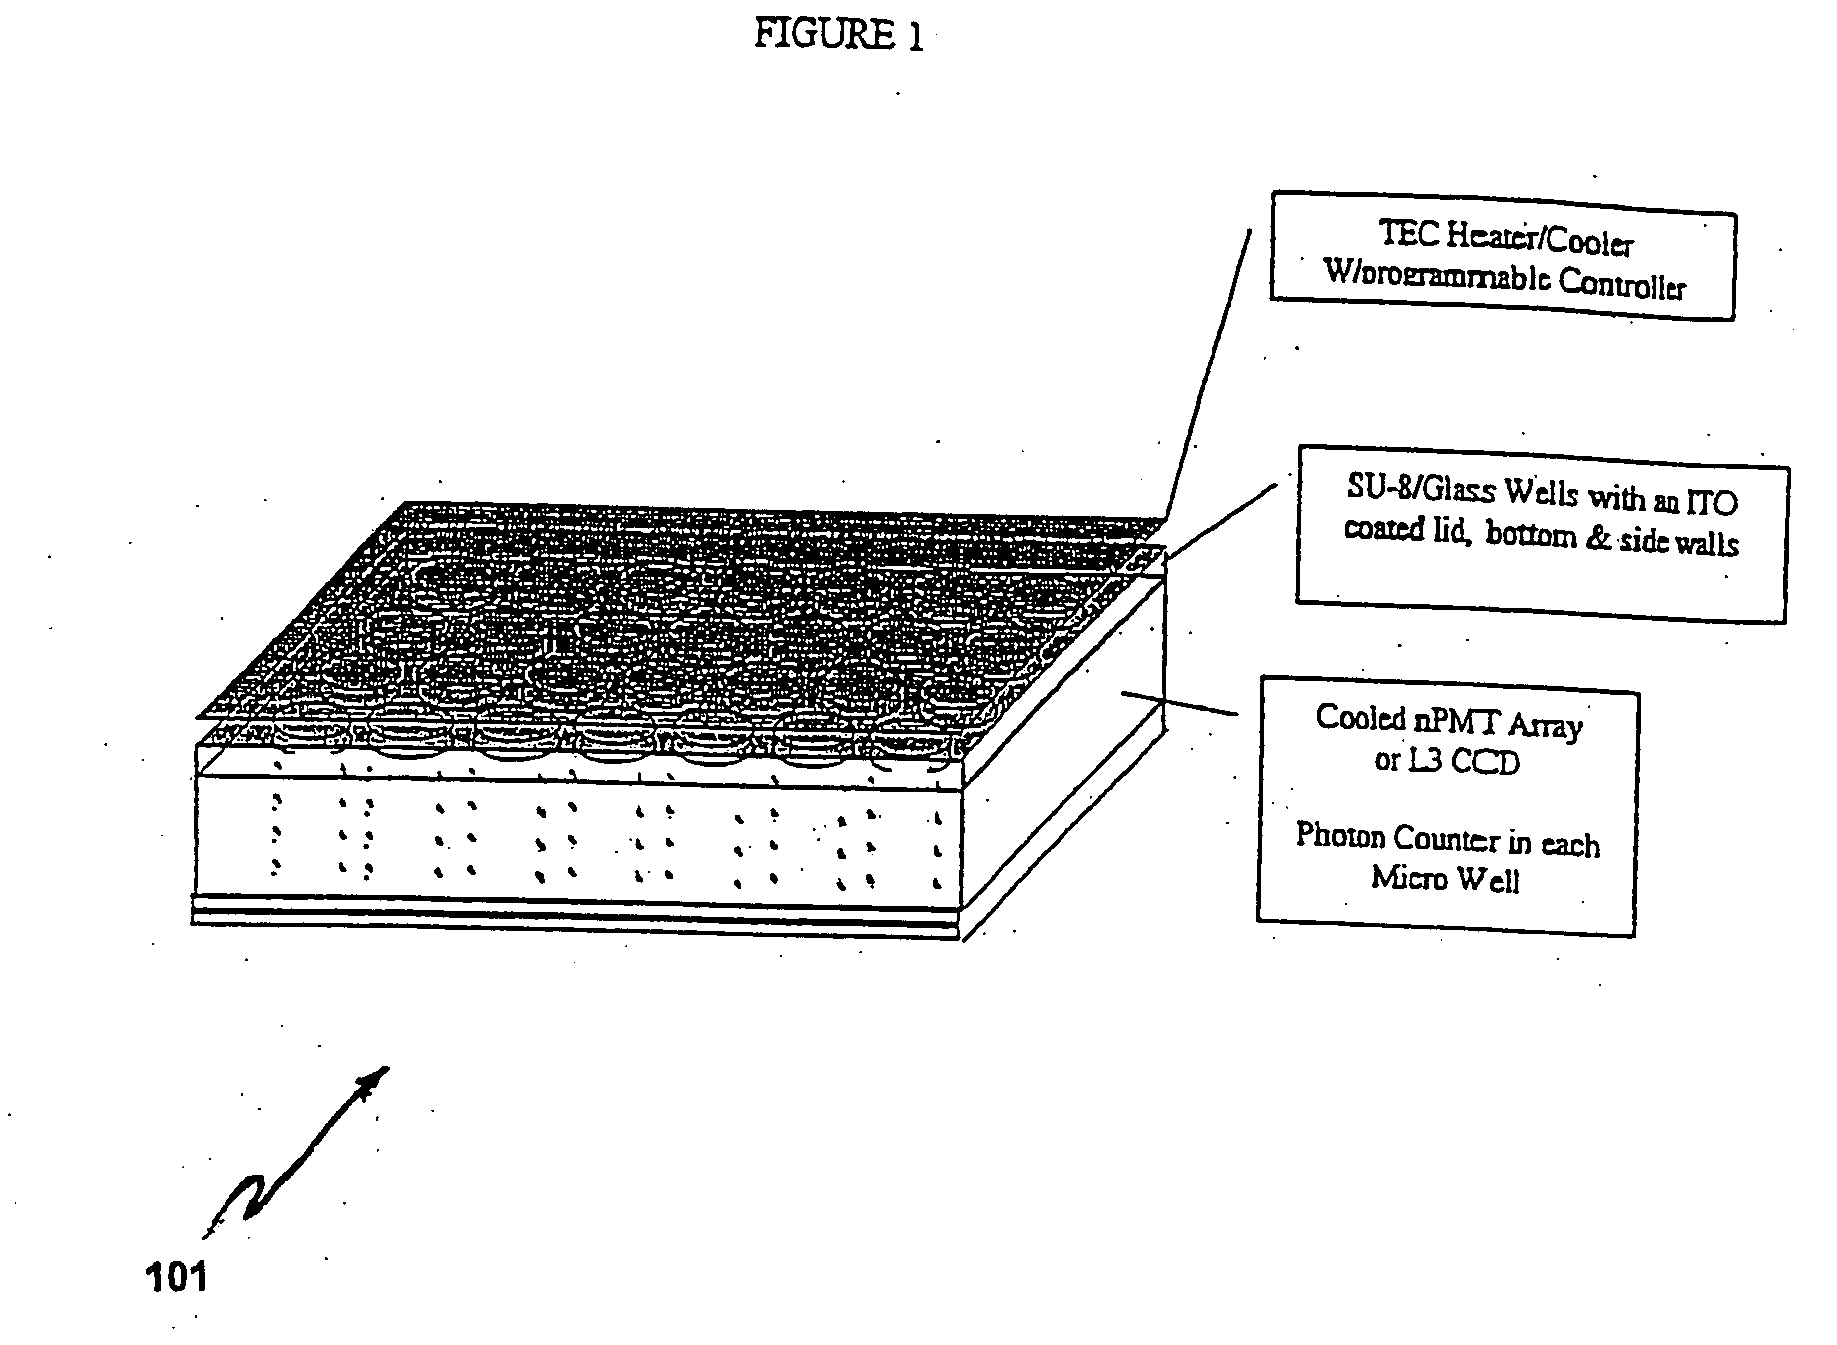 Thermo-controllable high-density chips for multiplex analyses